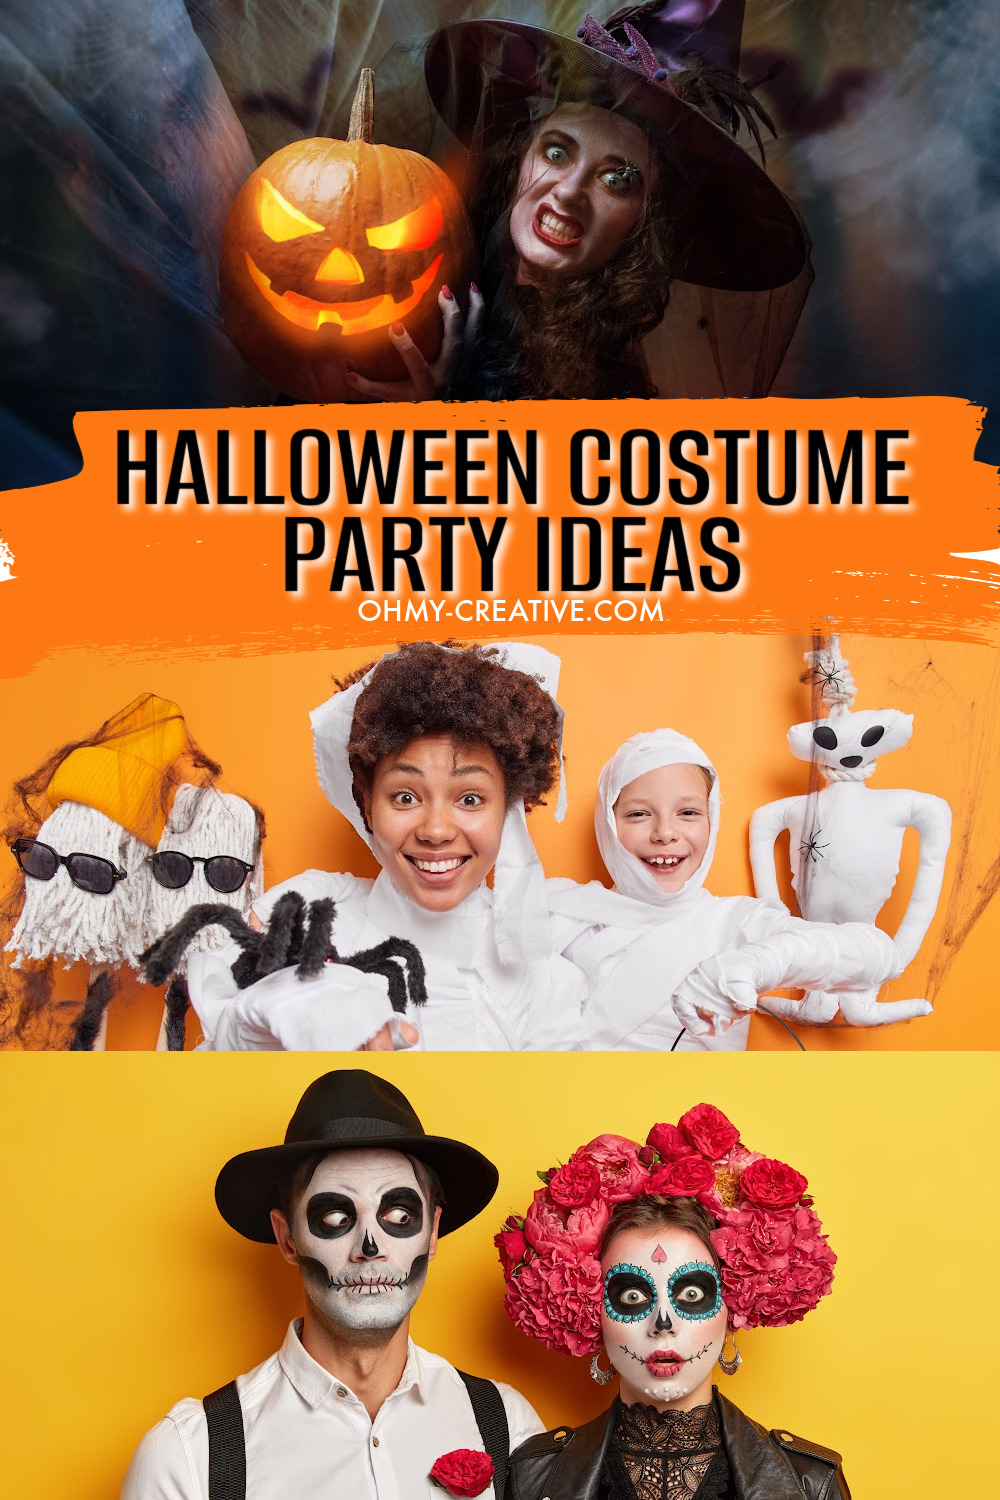 Great Halloween Costume party ideas - in this collage is a spooky witch holding a pumpkin, a women and boy dressed up as mummies and a couple in Day of the Dead costumes. 